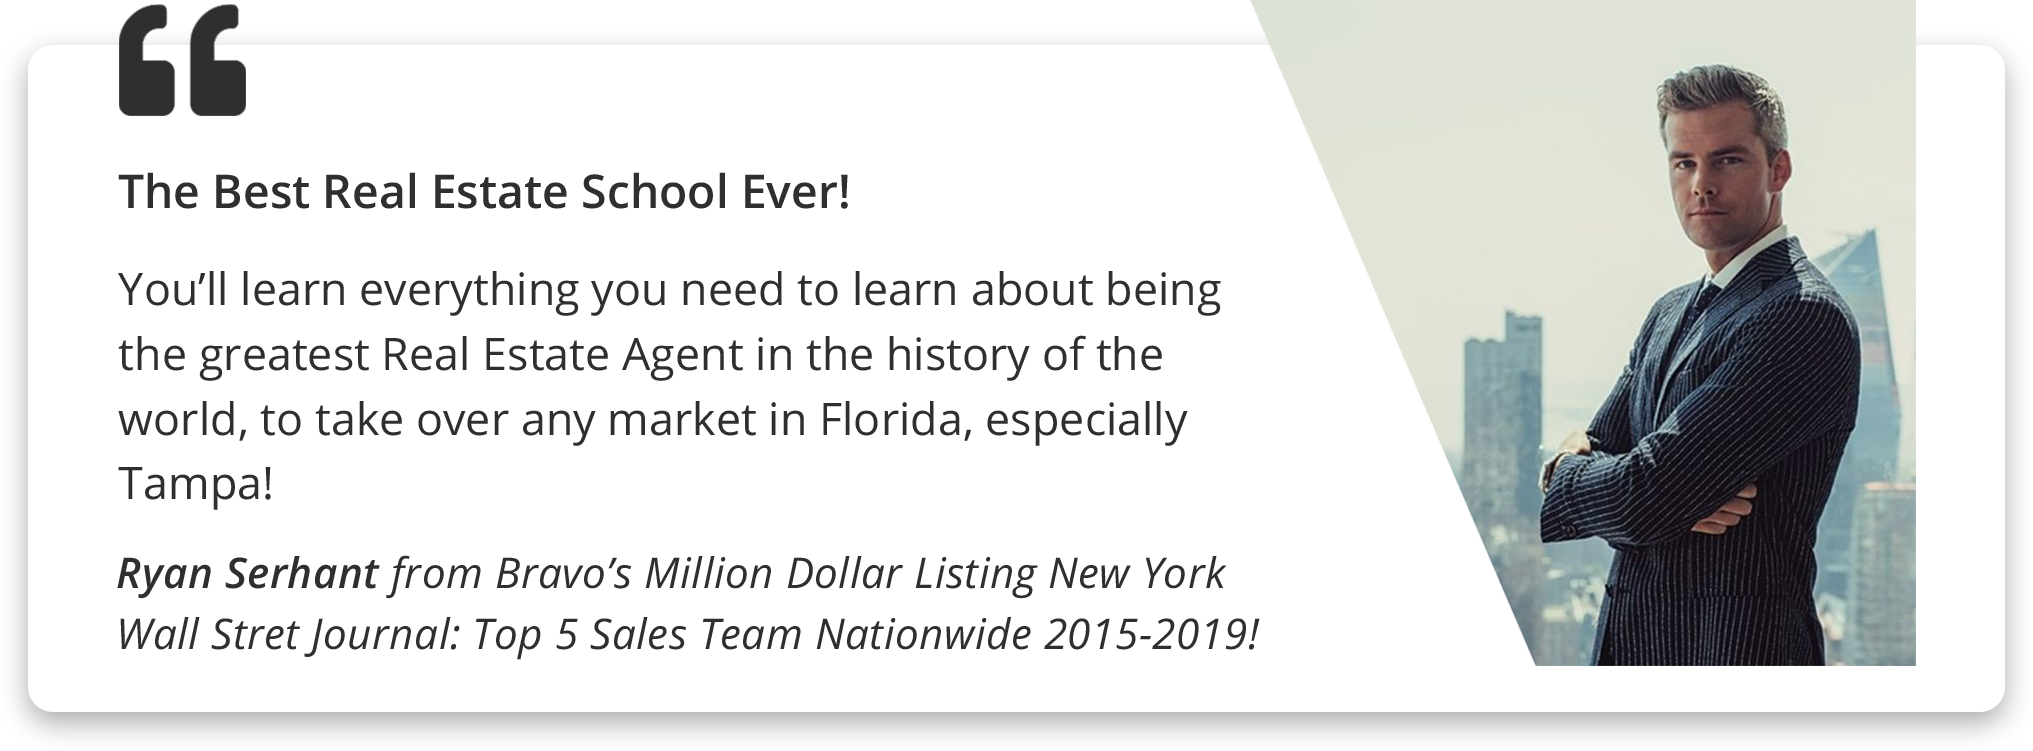 The Best Real Estate School Ever!